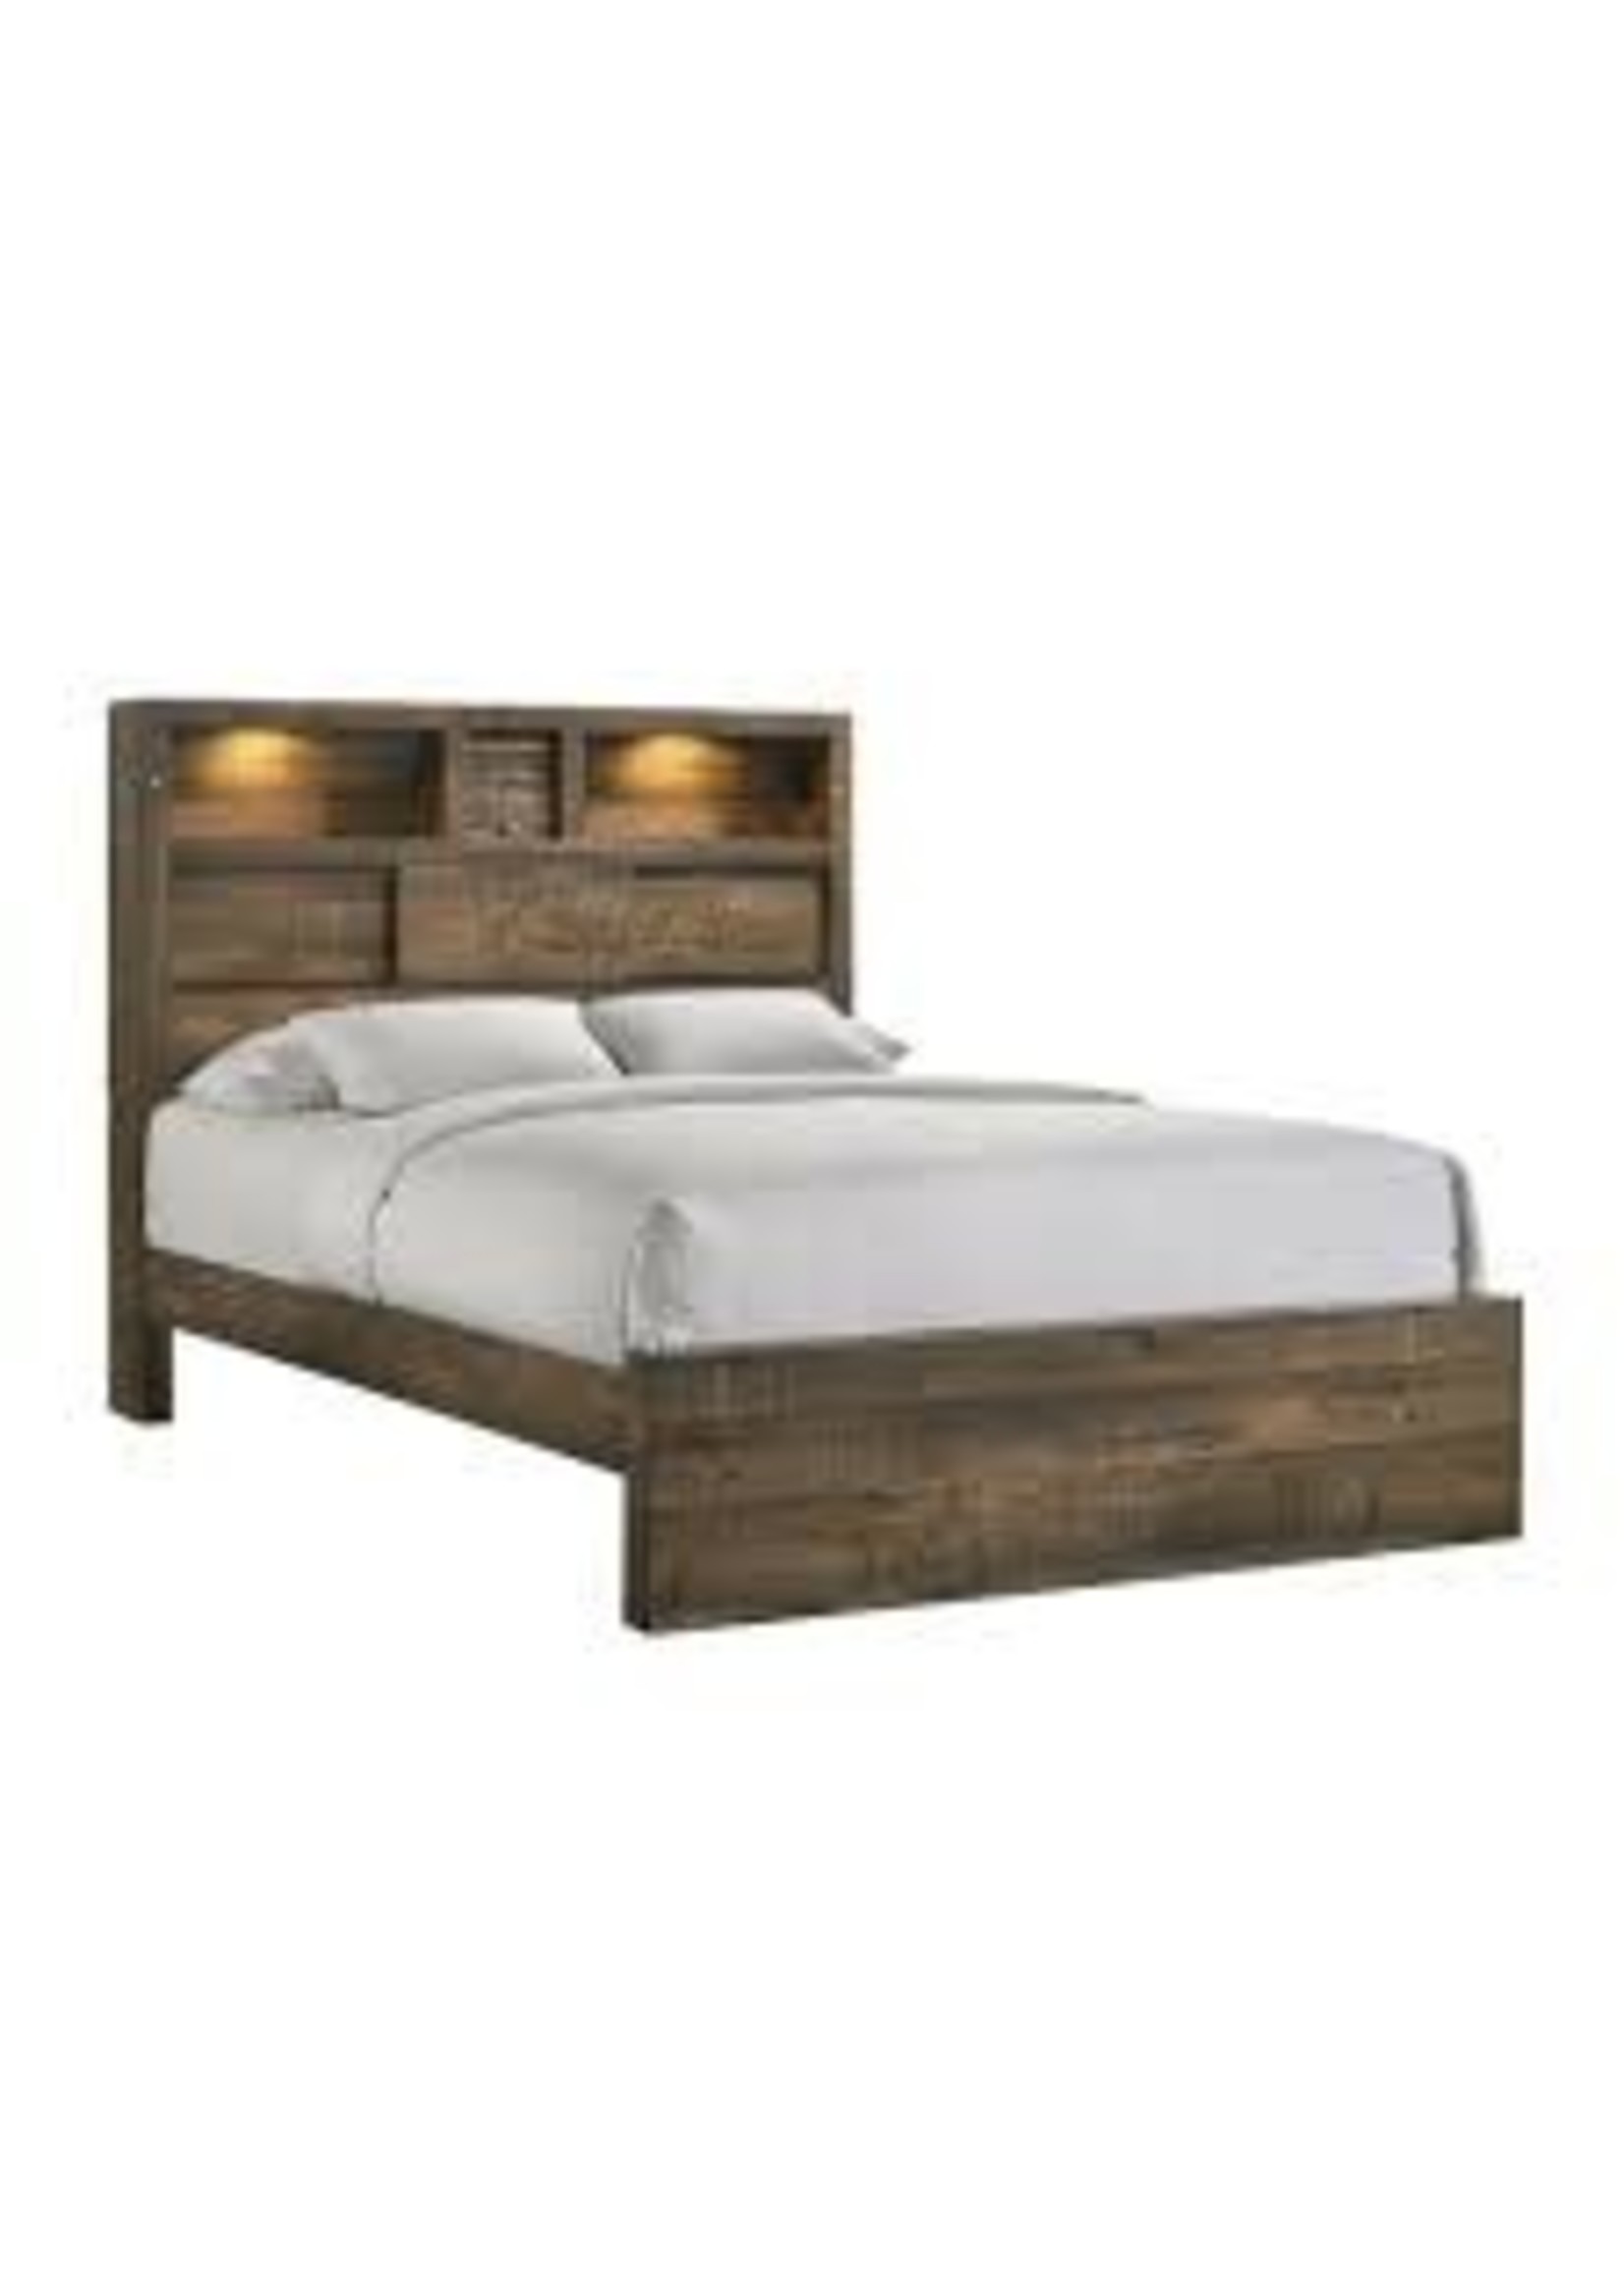 ELEMENTS QUEEN  BED BAILEY DRIFT FINISH STORAGE HB W/LIGHTS & SPEAKERS